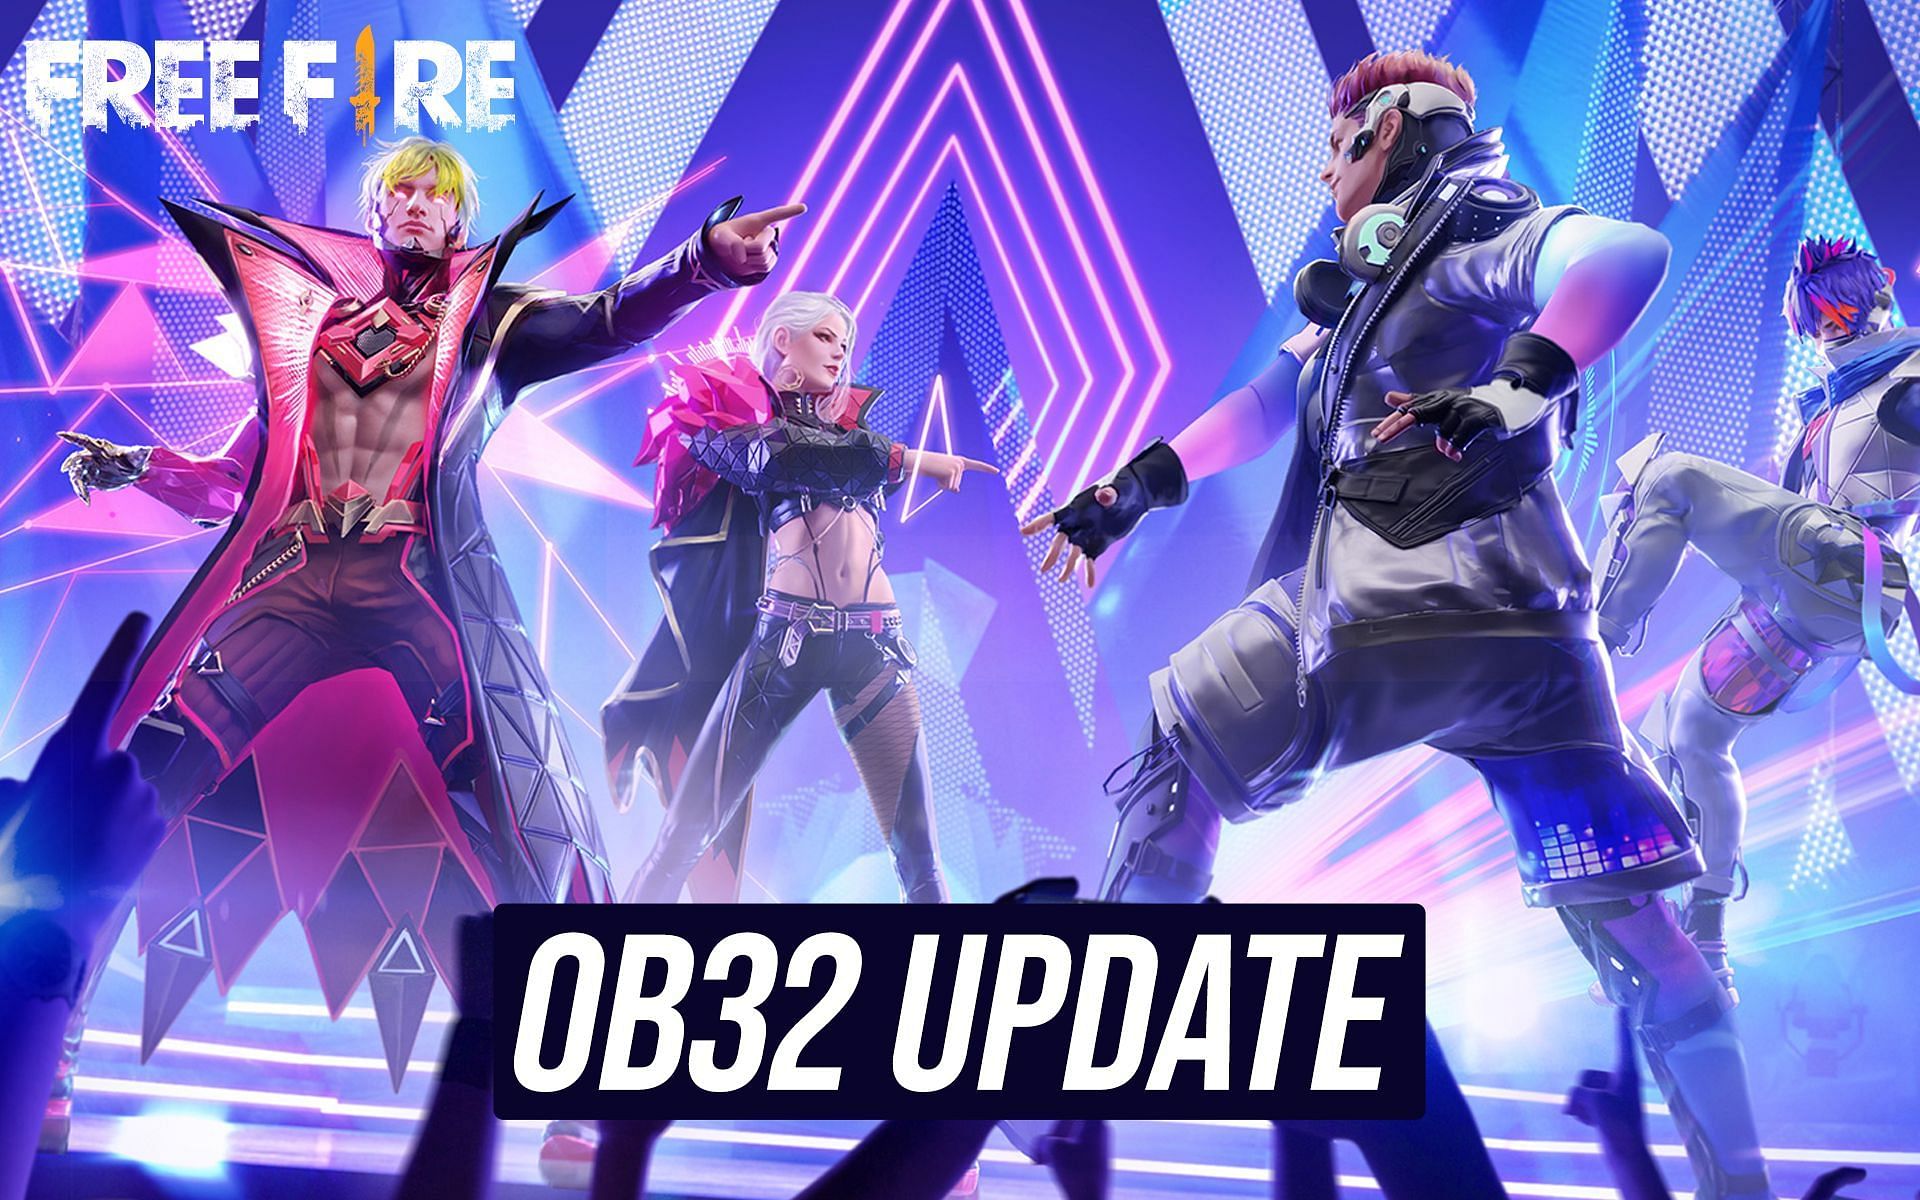 OB32 update of the game can be downloaded now (Image via Sportskeeda)